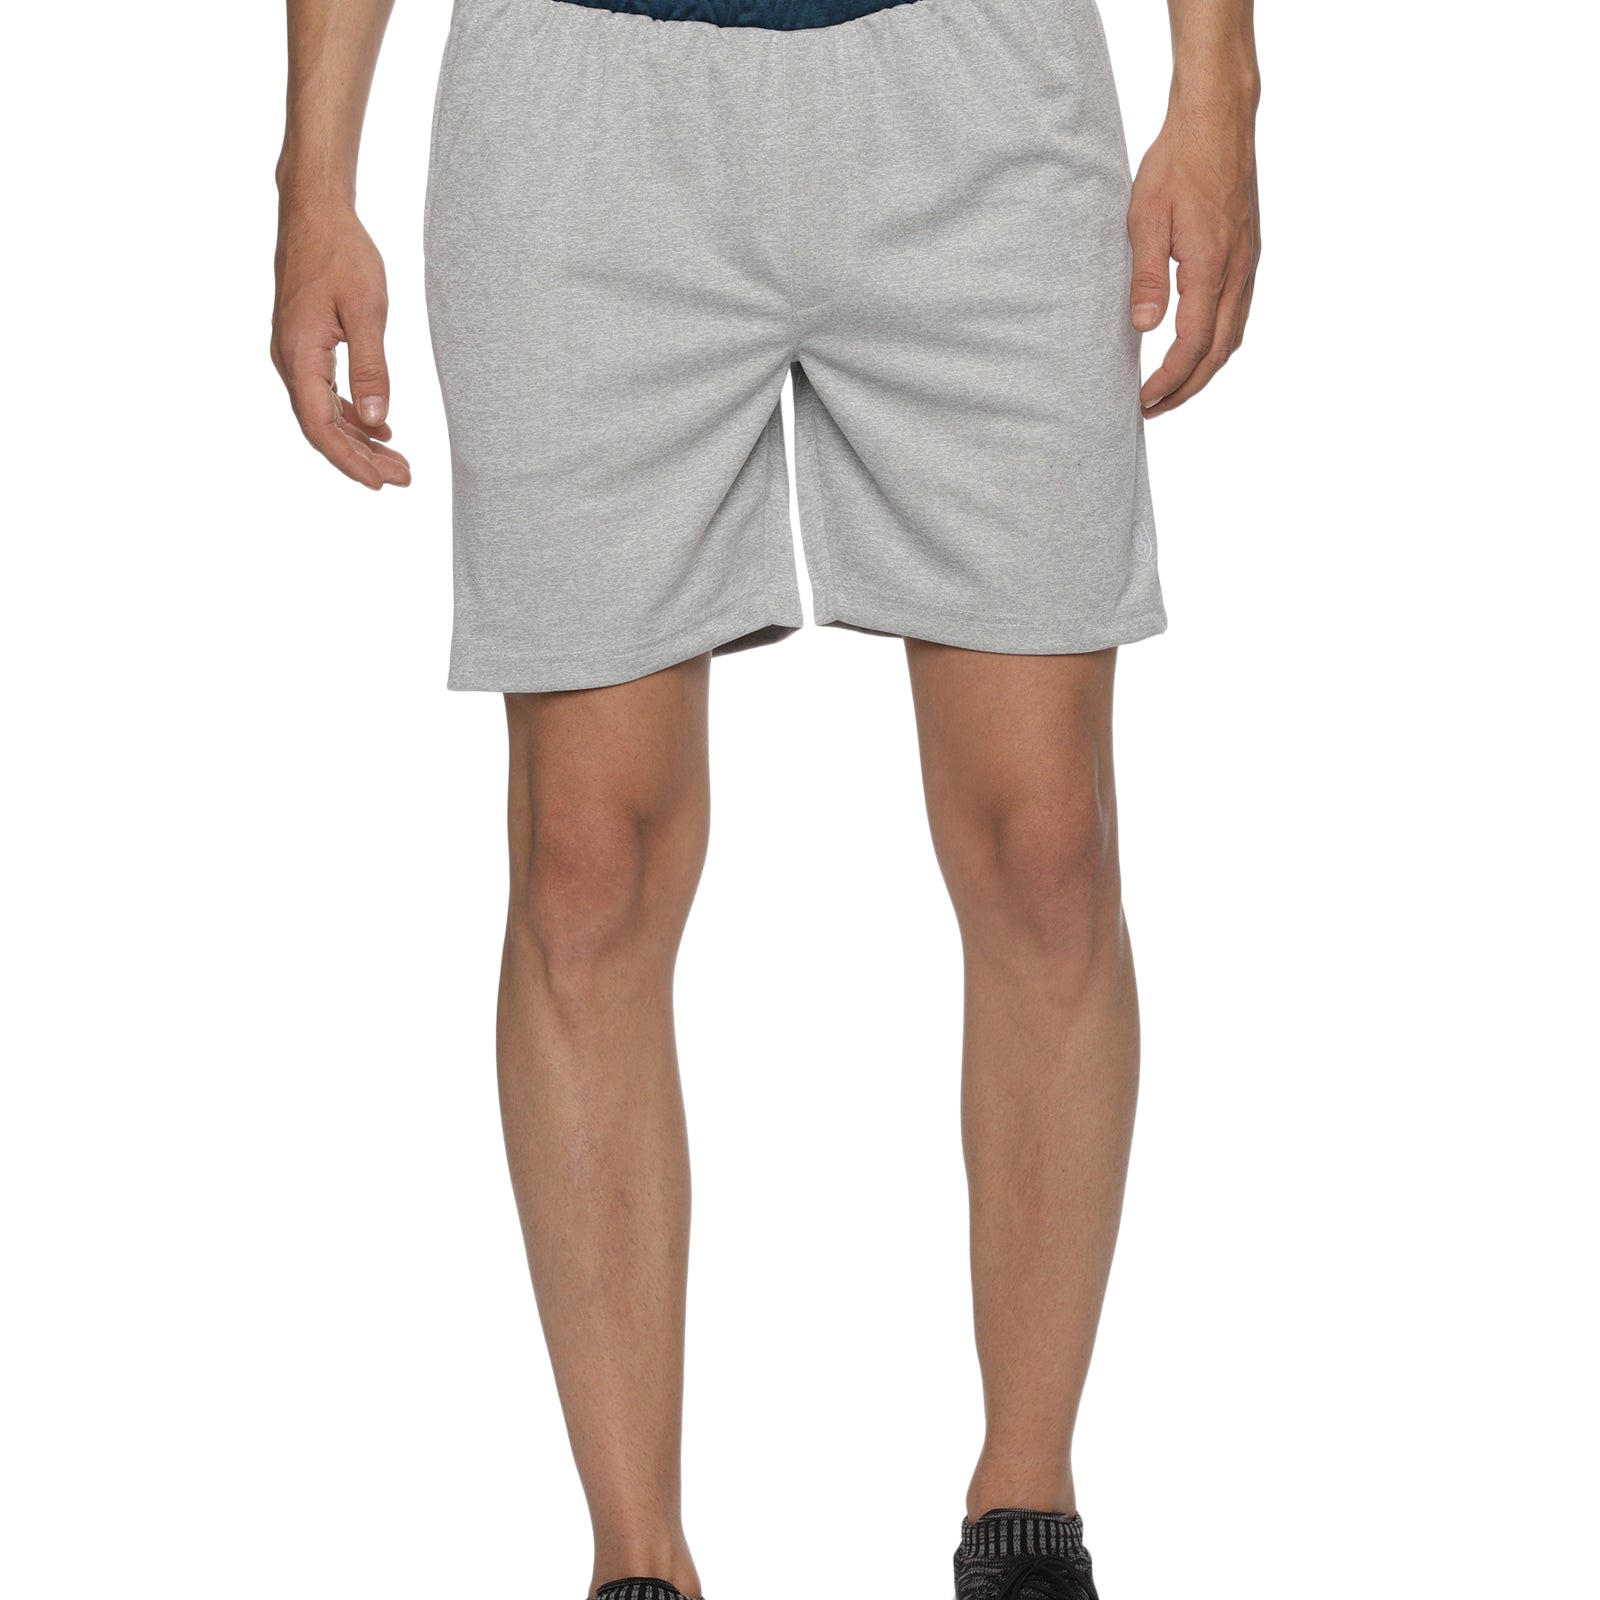 Men Basketball wear with Grey piping.